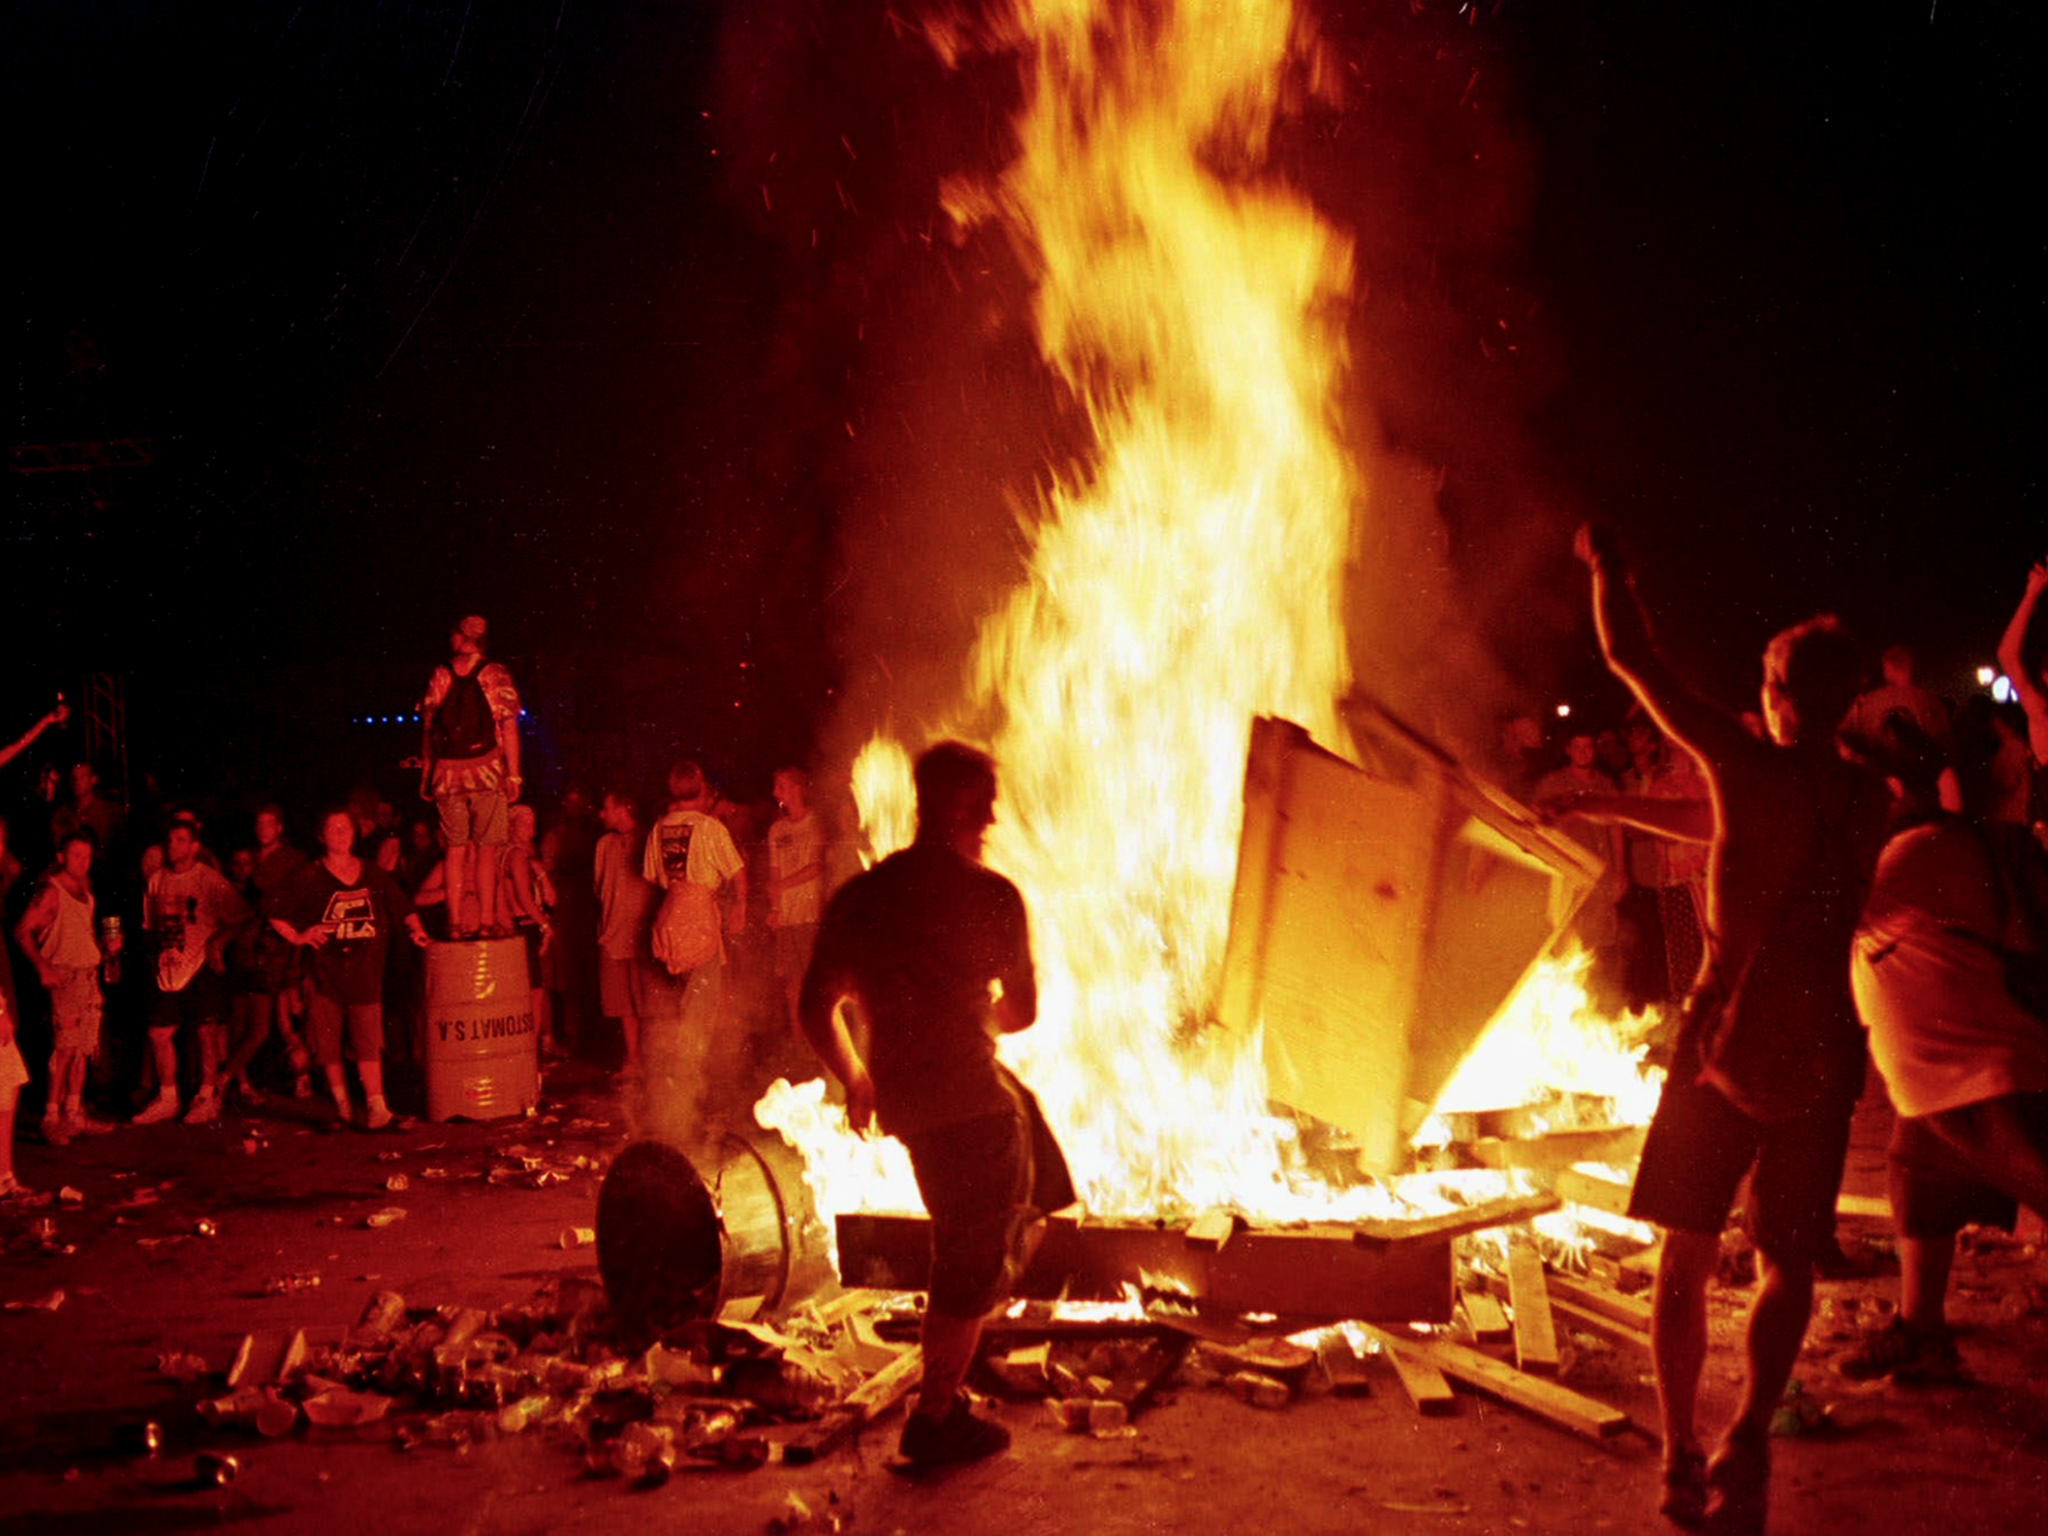 Woodstock 99 The disturbing true story behind the disastrous music festival The Independent pic